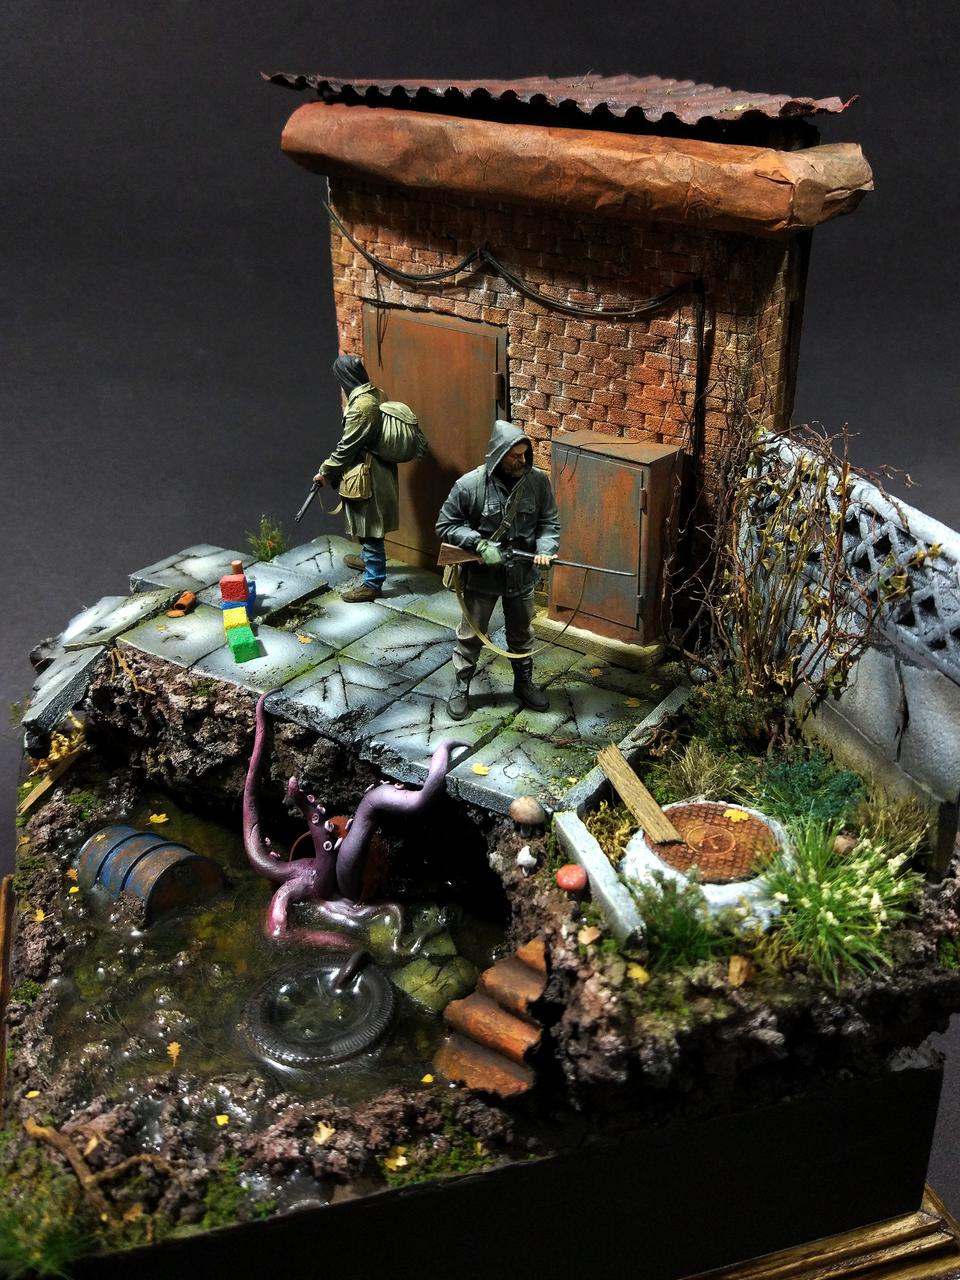 Dioramas and Vignettes: New undiscovered world, photo #7